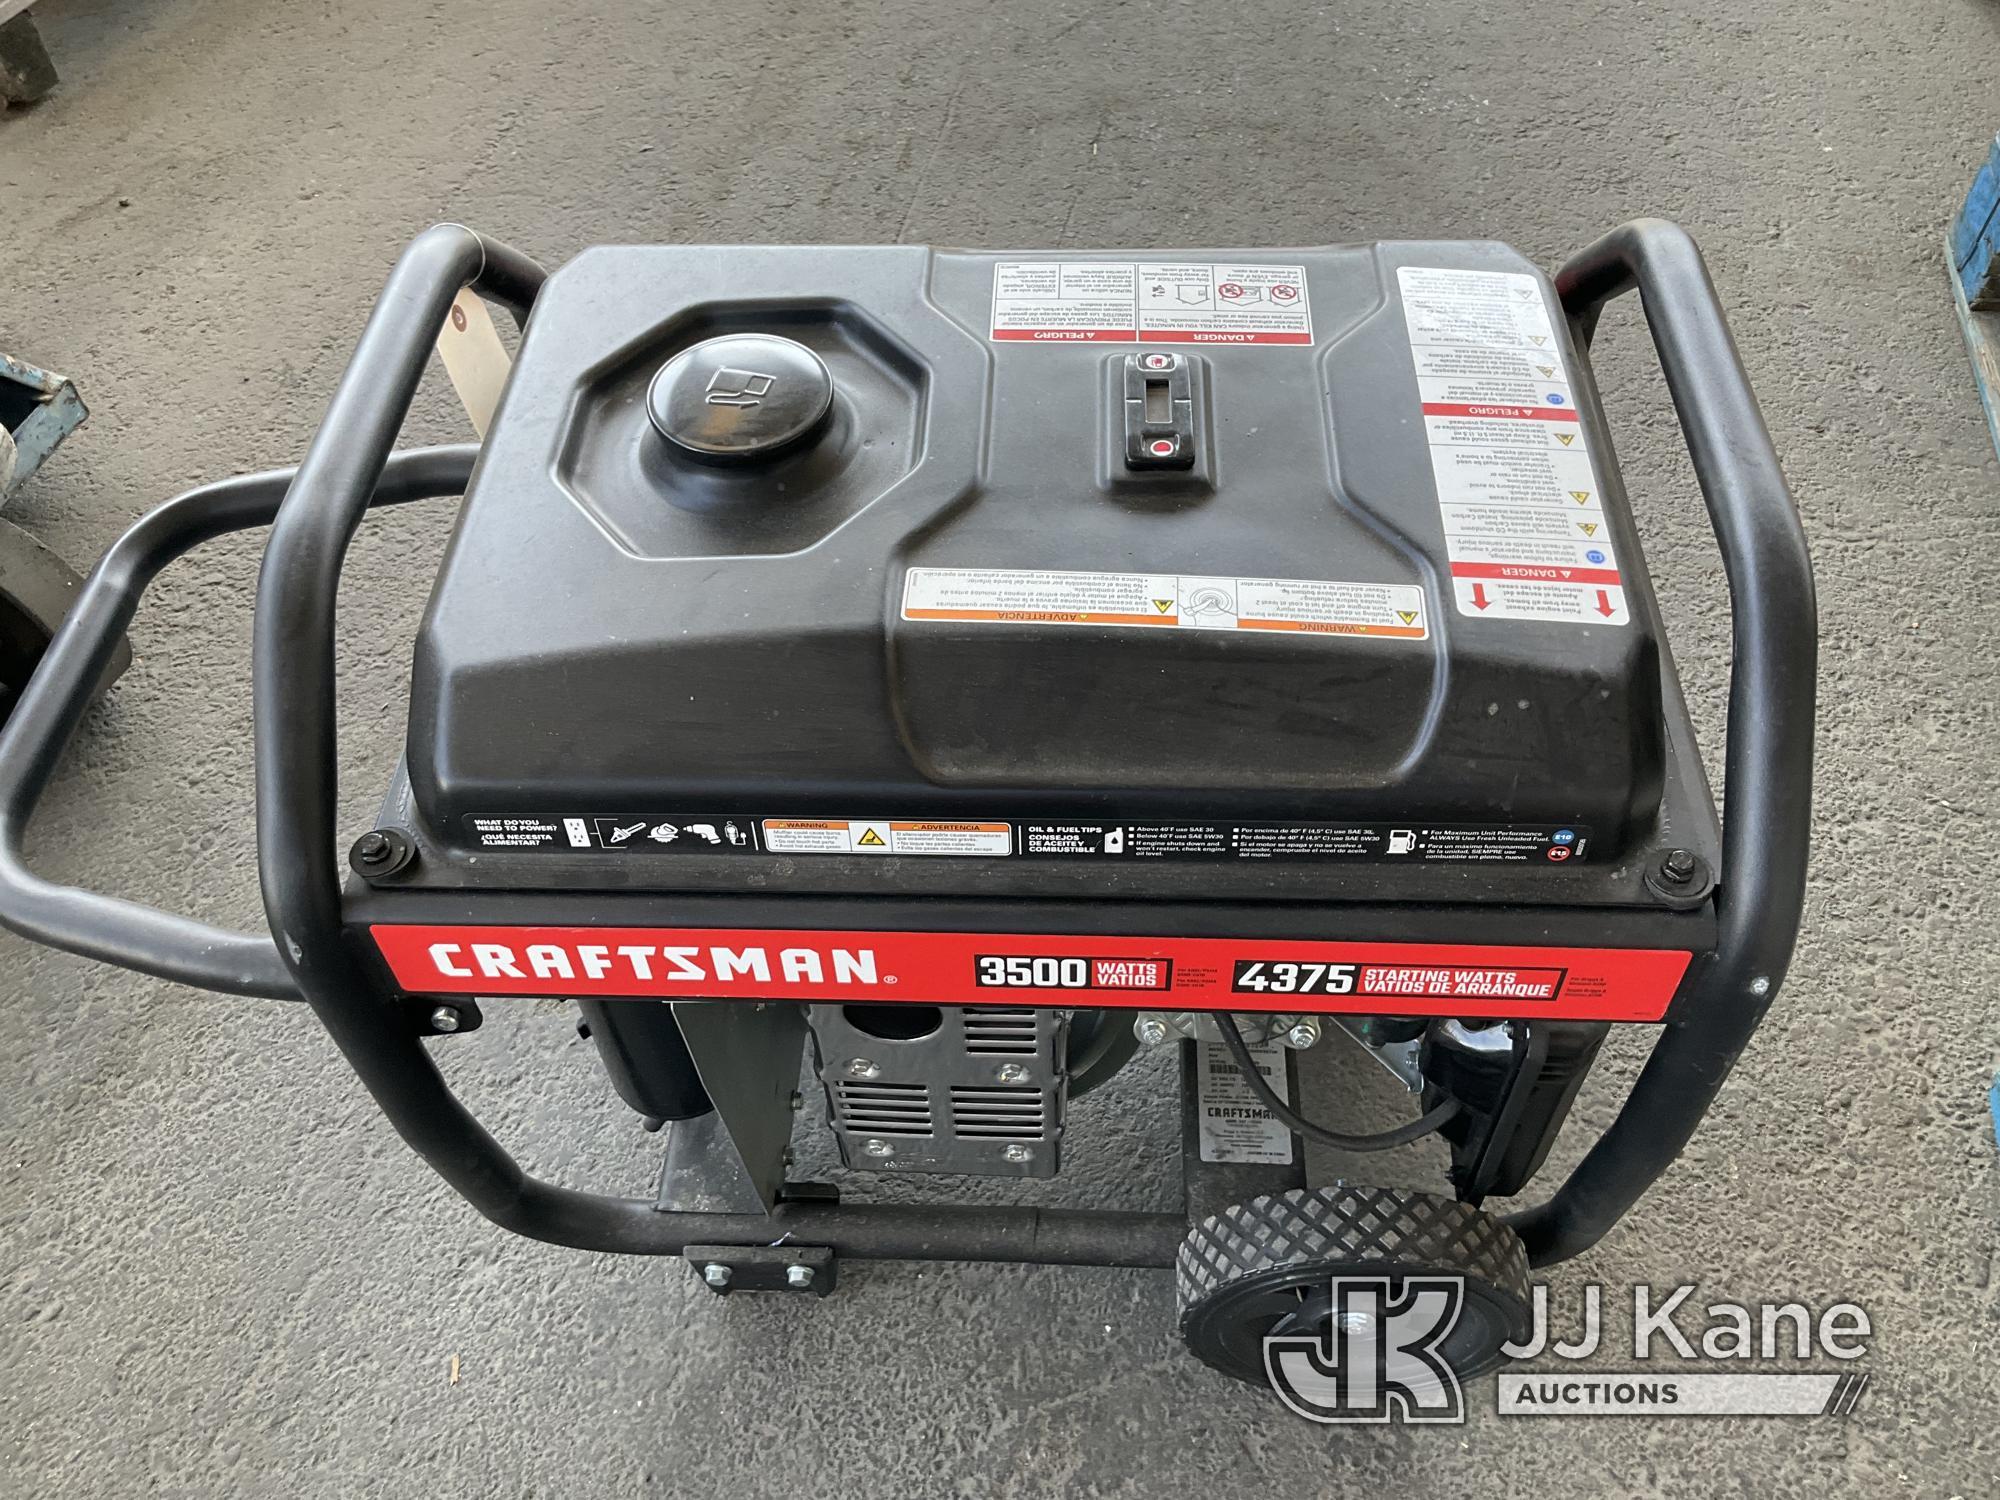 (Jurupa Valley, CA) Craftsman 3500 Generator (Used) NOTE: This unit is being sold AS IS/WHERE IS via